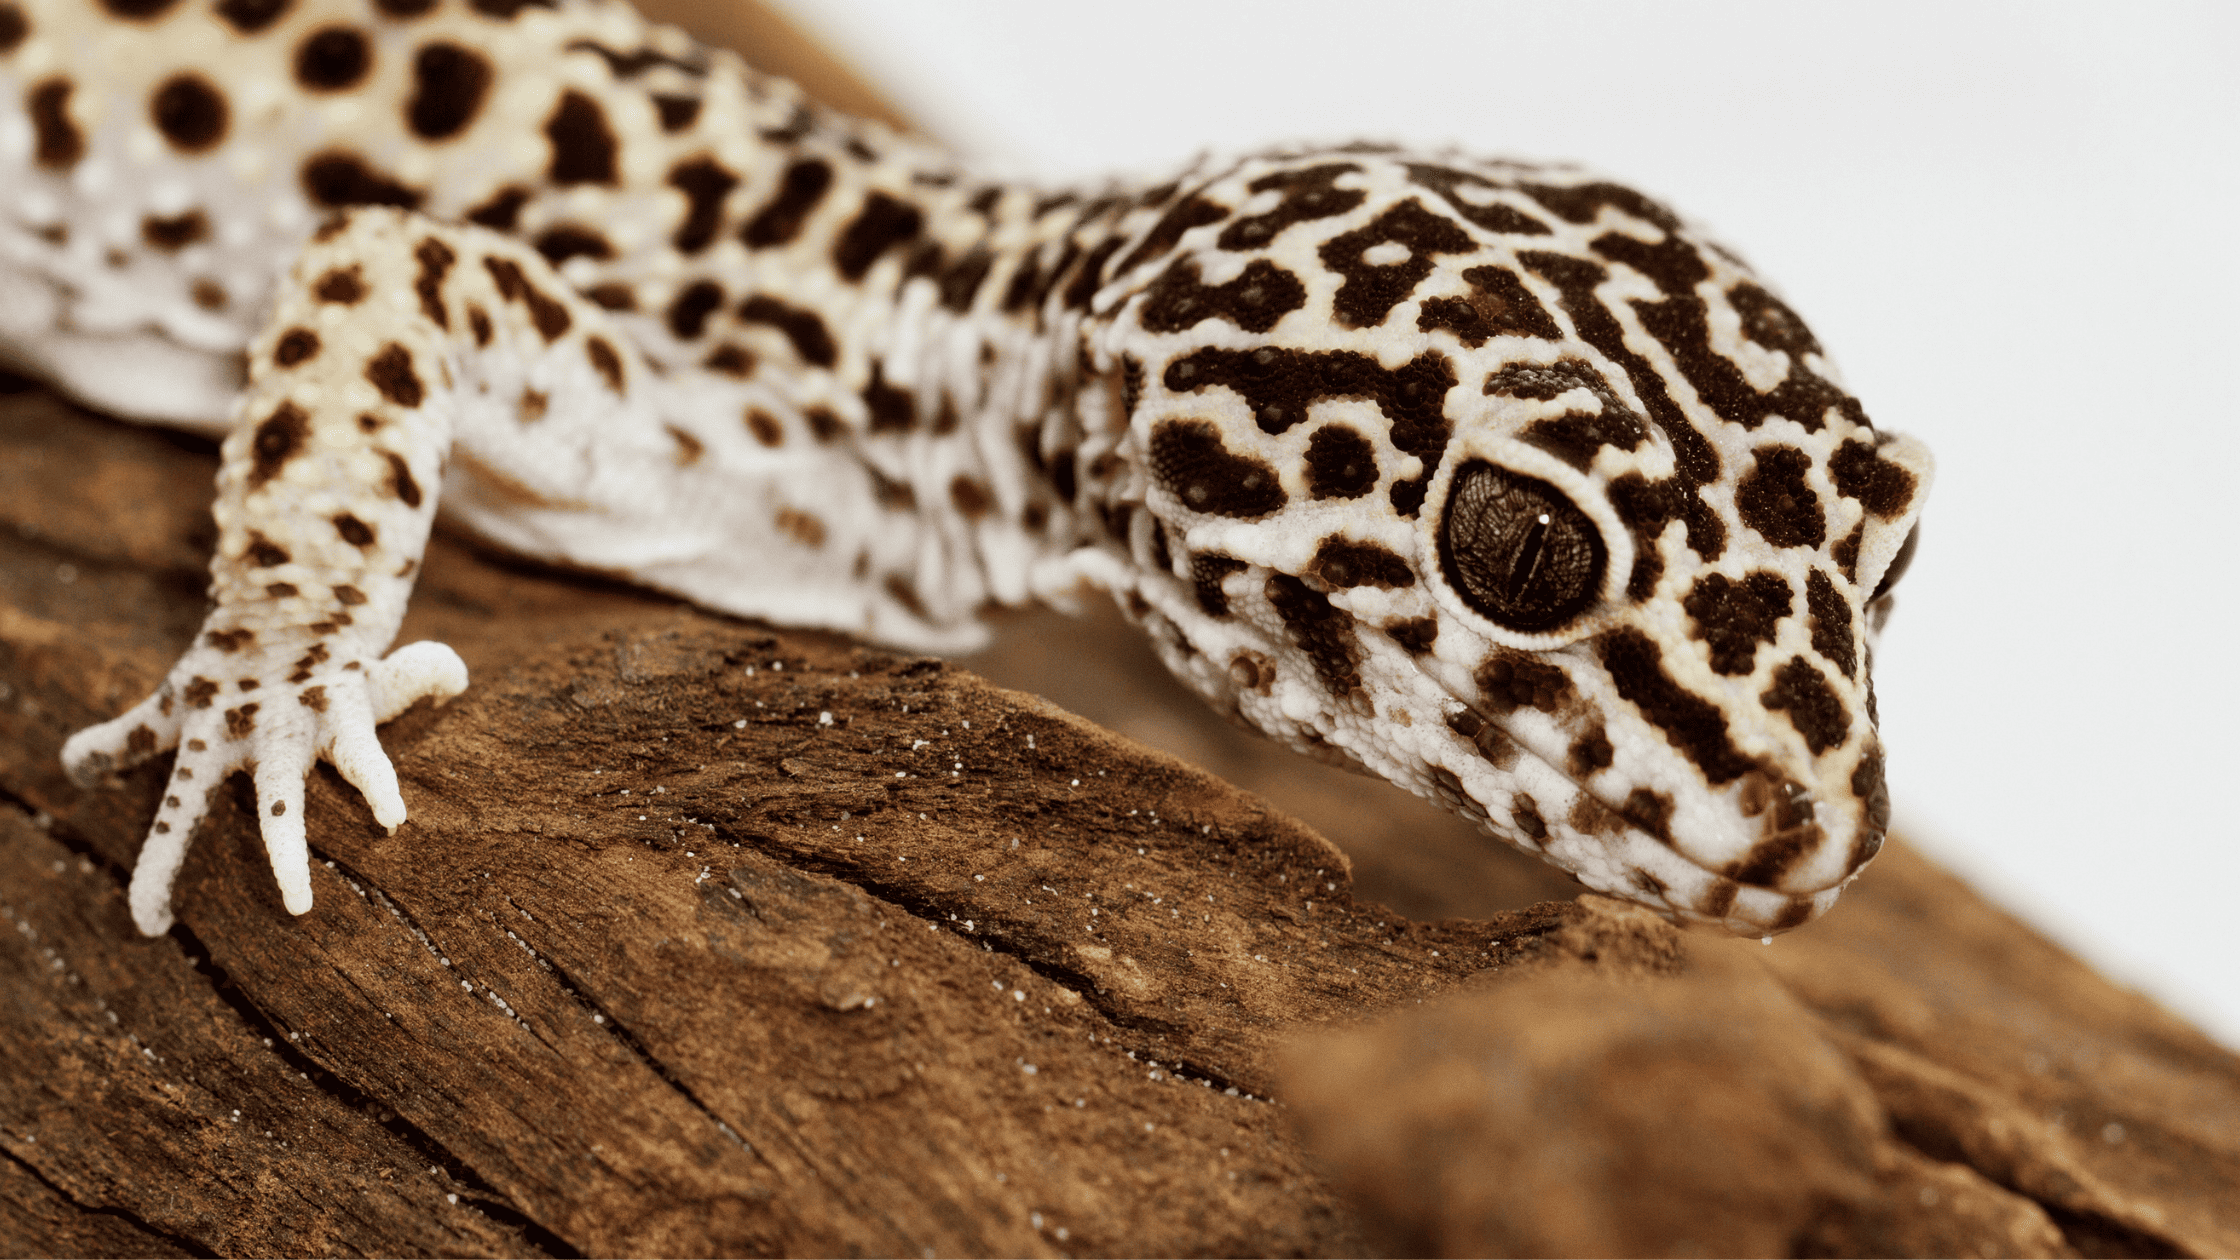 Are leopard geckos good pets for beginners?